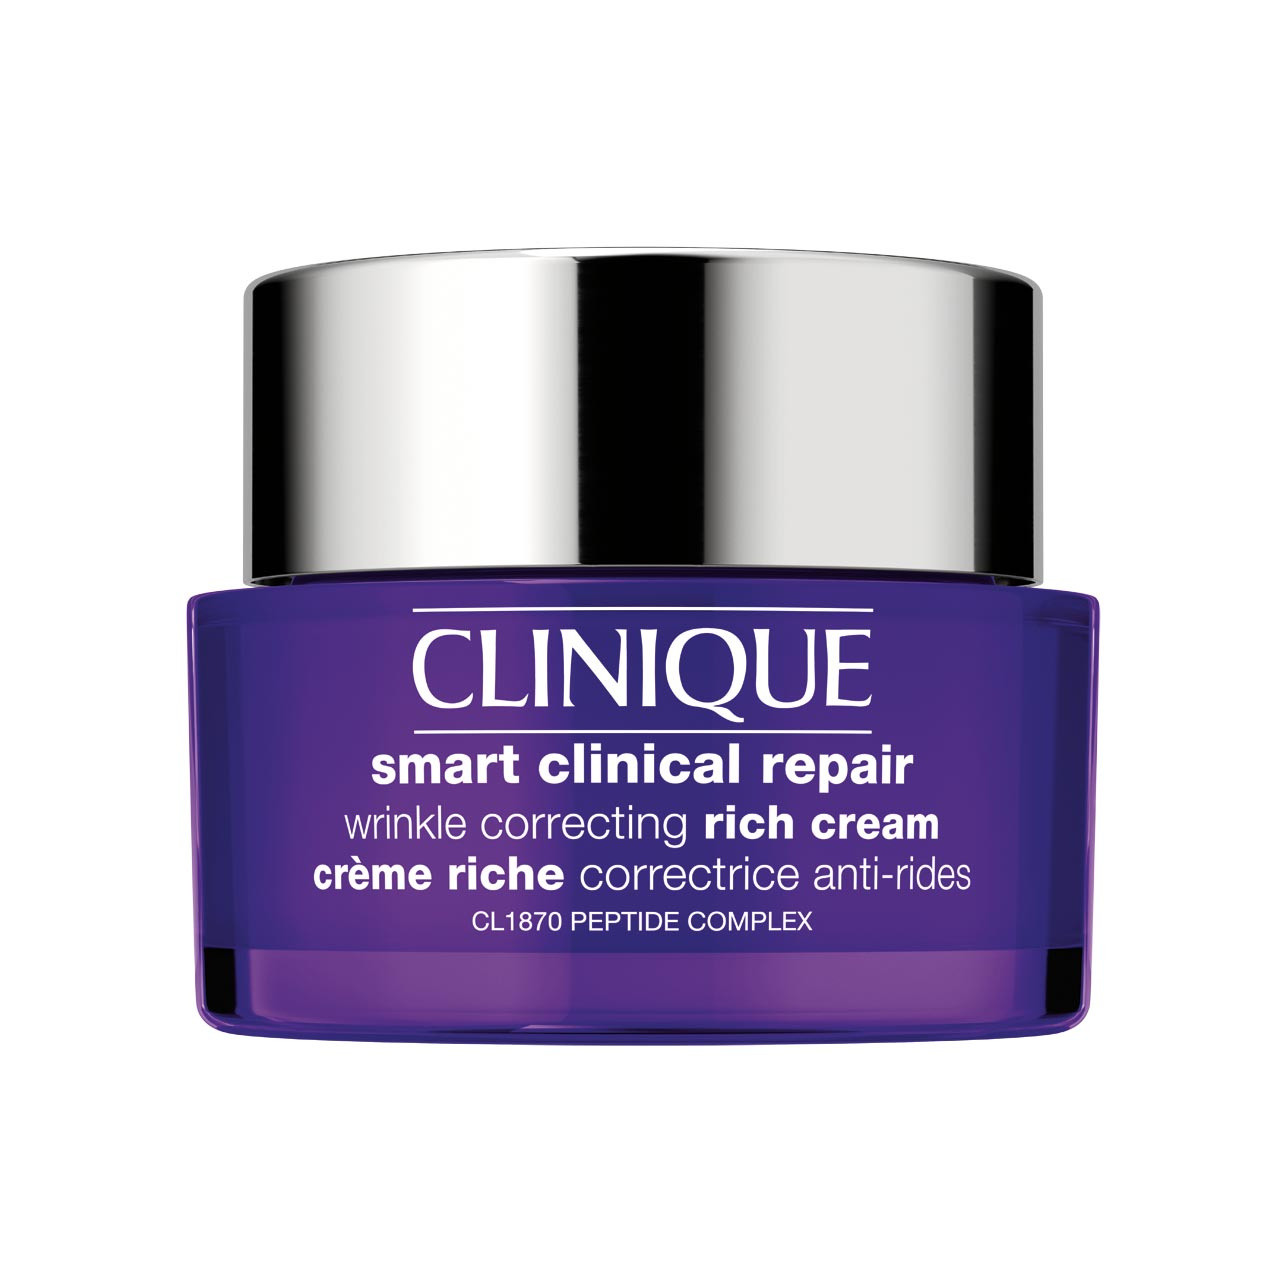 Smart clinical repair wrinkle correcting cream - all skin types, Purple, large image number 0